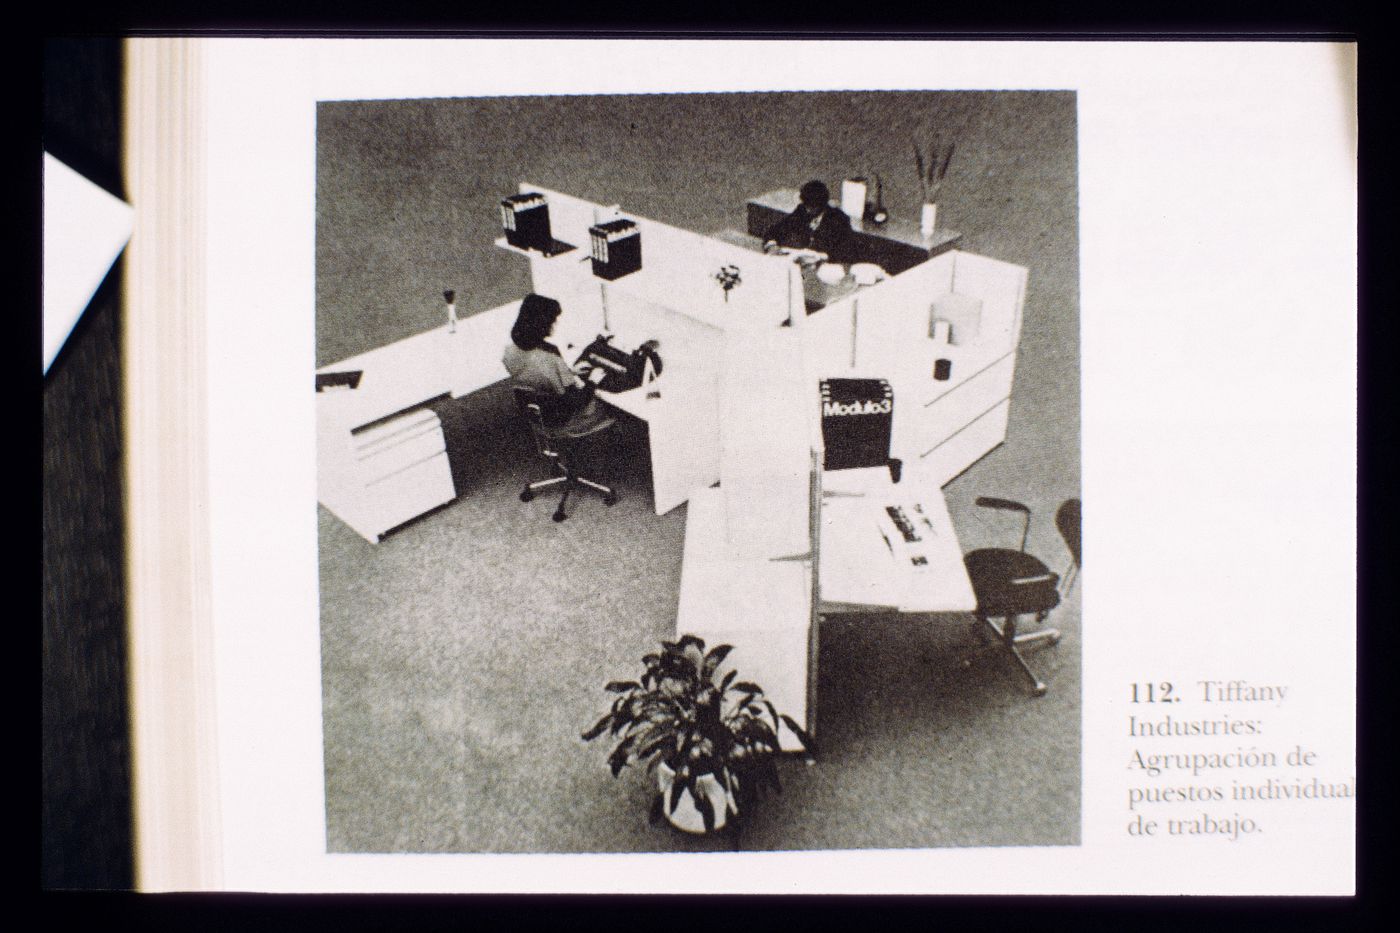 Slide of a photograph of a grouping of individual workstations, by Tiffany Industries